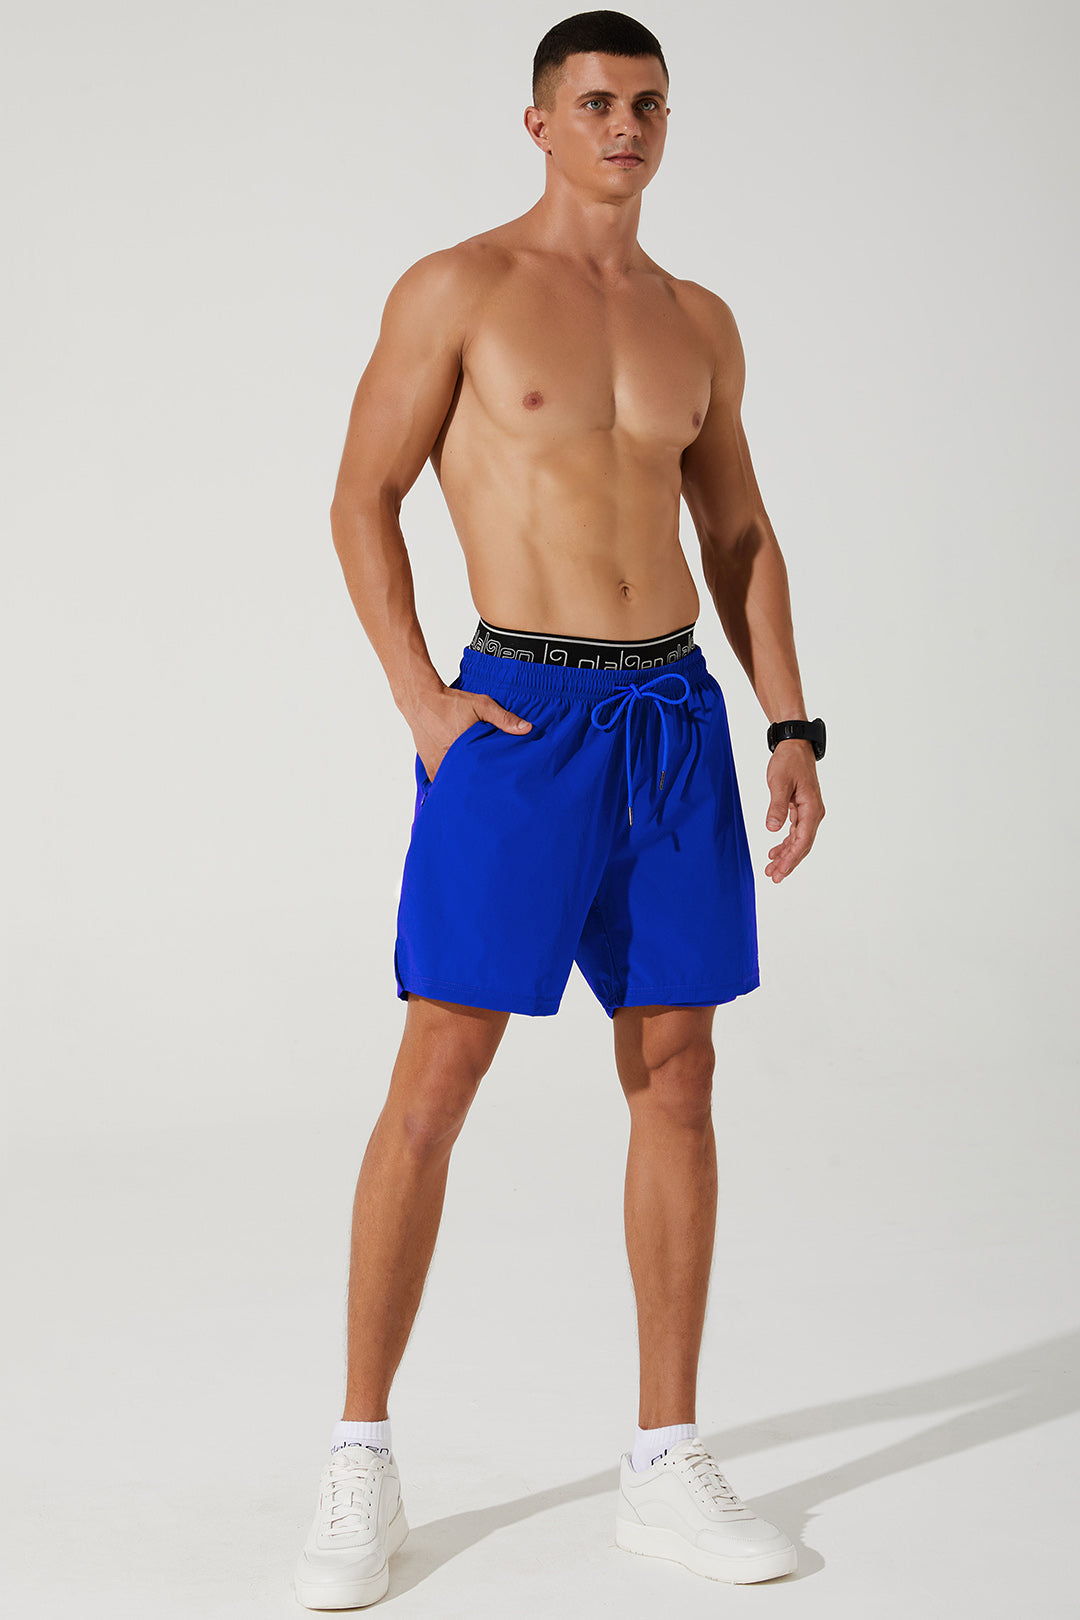 Blue men's shorts with repetition pattern, Vardan 9, OW-0014-MSH-BL, image 3.